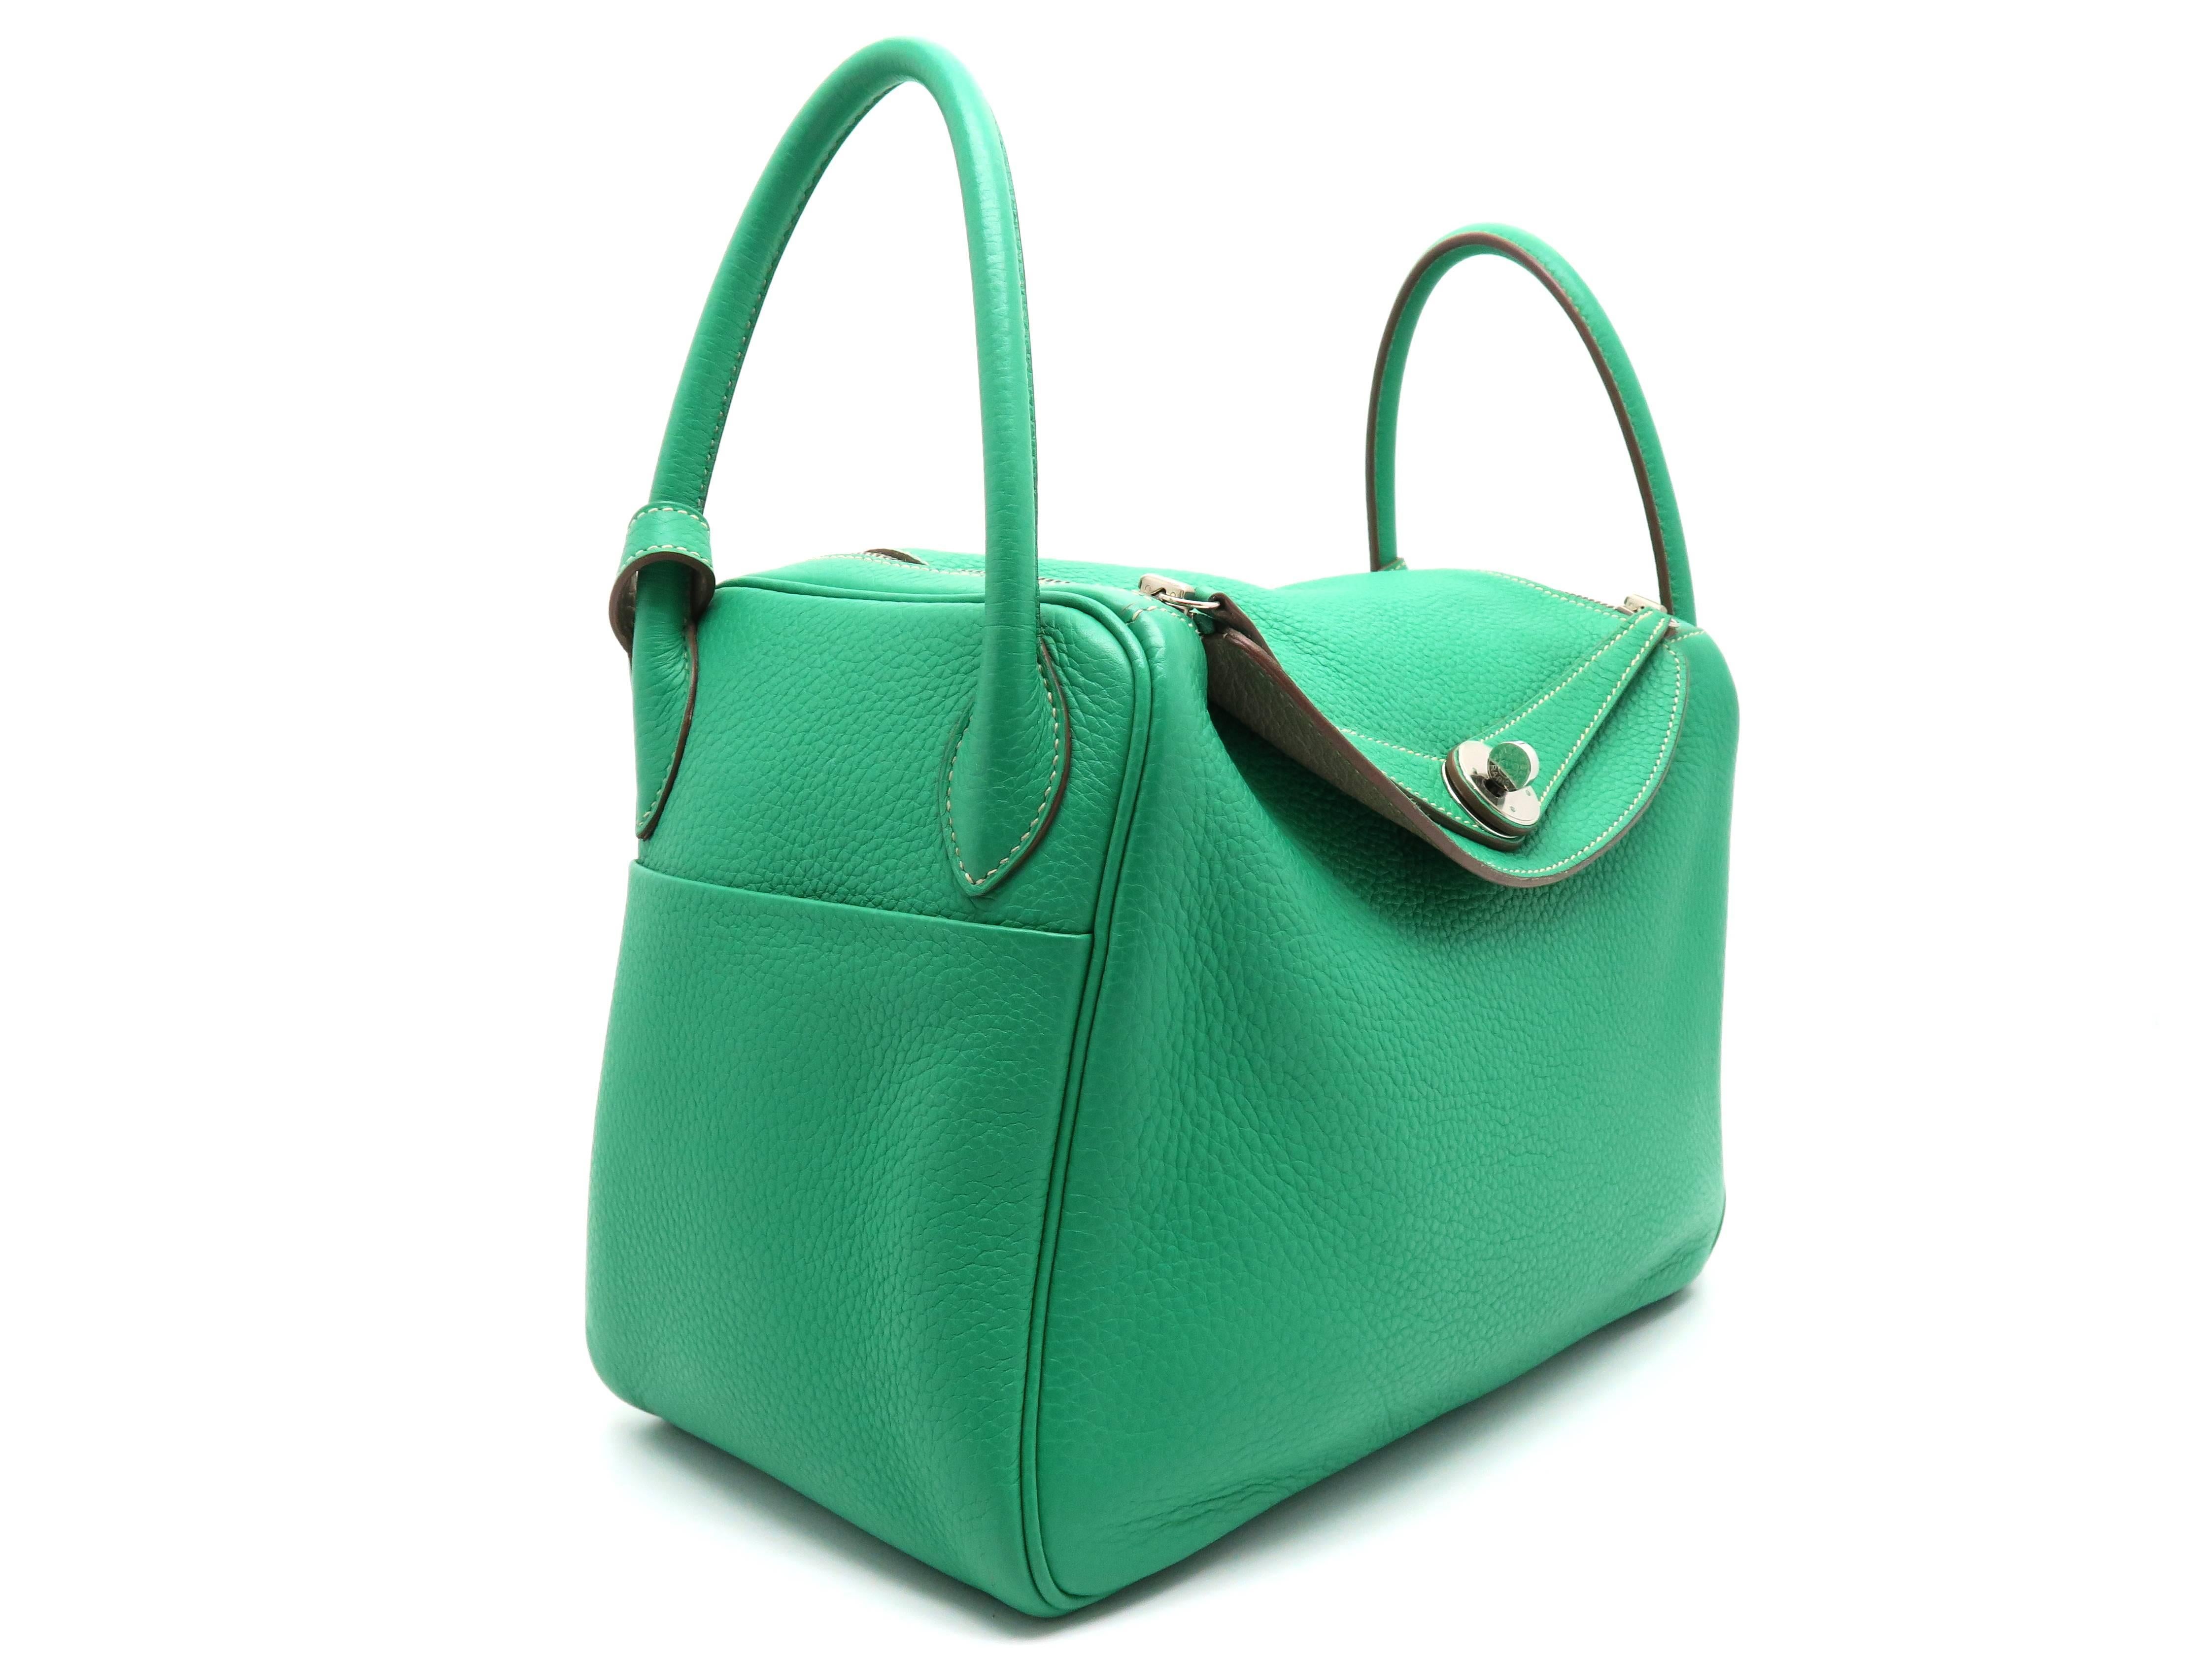 Color: Green / Menthe (designer color) 

Material: Clemence Leather

Condition: Rank S 
Overall: Almost New
Surface: Good
Corners: Good
Edges: Good
Handles/Straps: Good
Hardware: Good

Dimension: W30 × H21 × D15cm（W11.8" × H8.2" ×